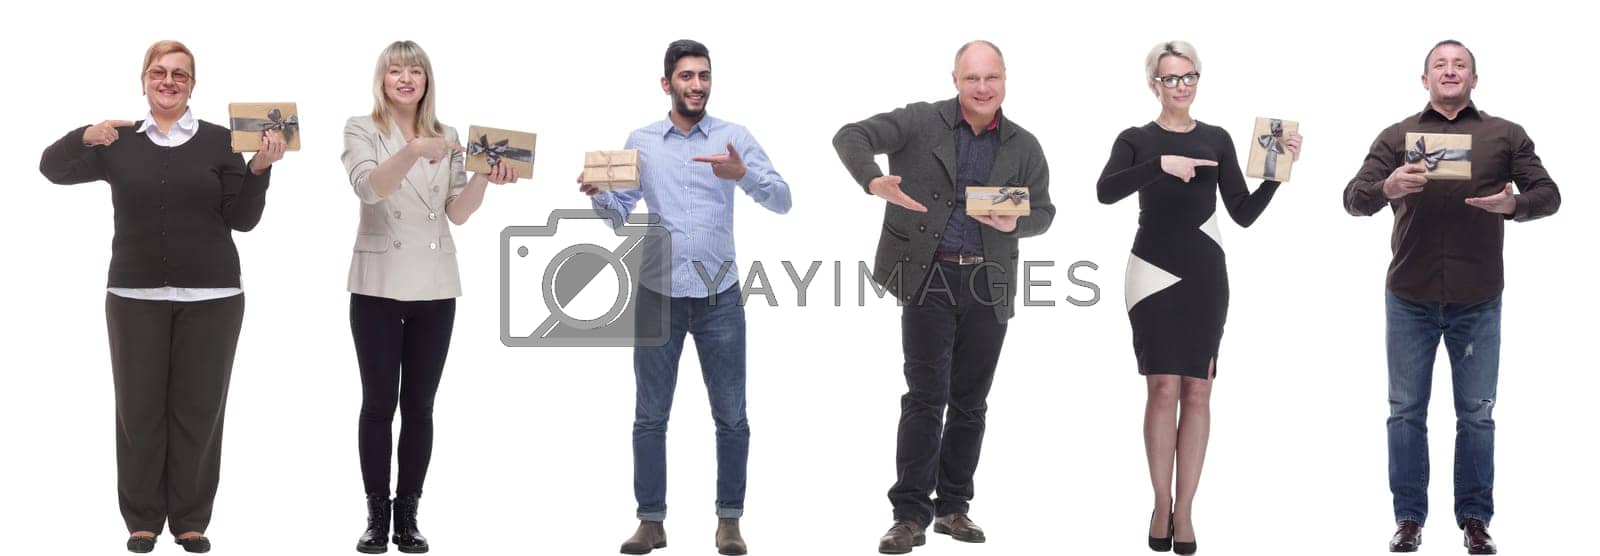 Royalty free image of group of happy people with gifts in their hands isolated by asdf